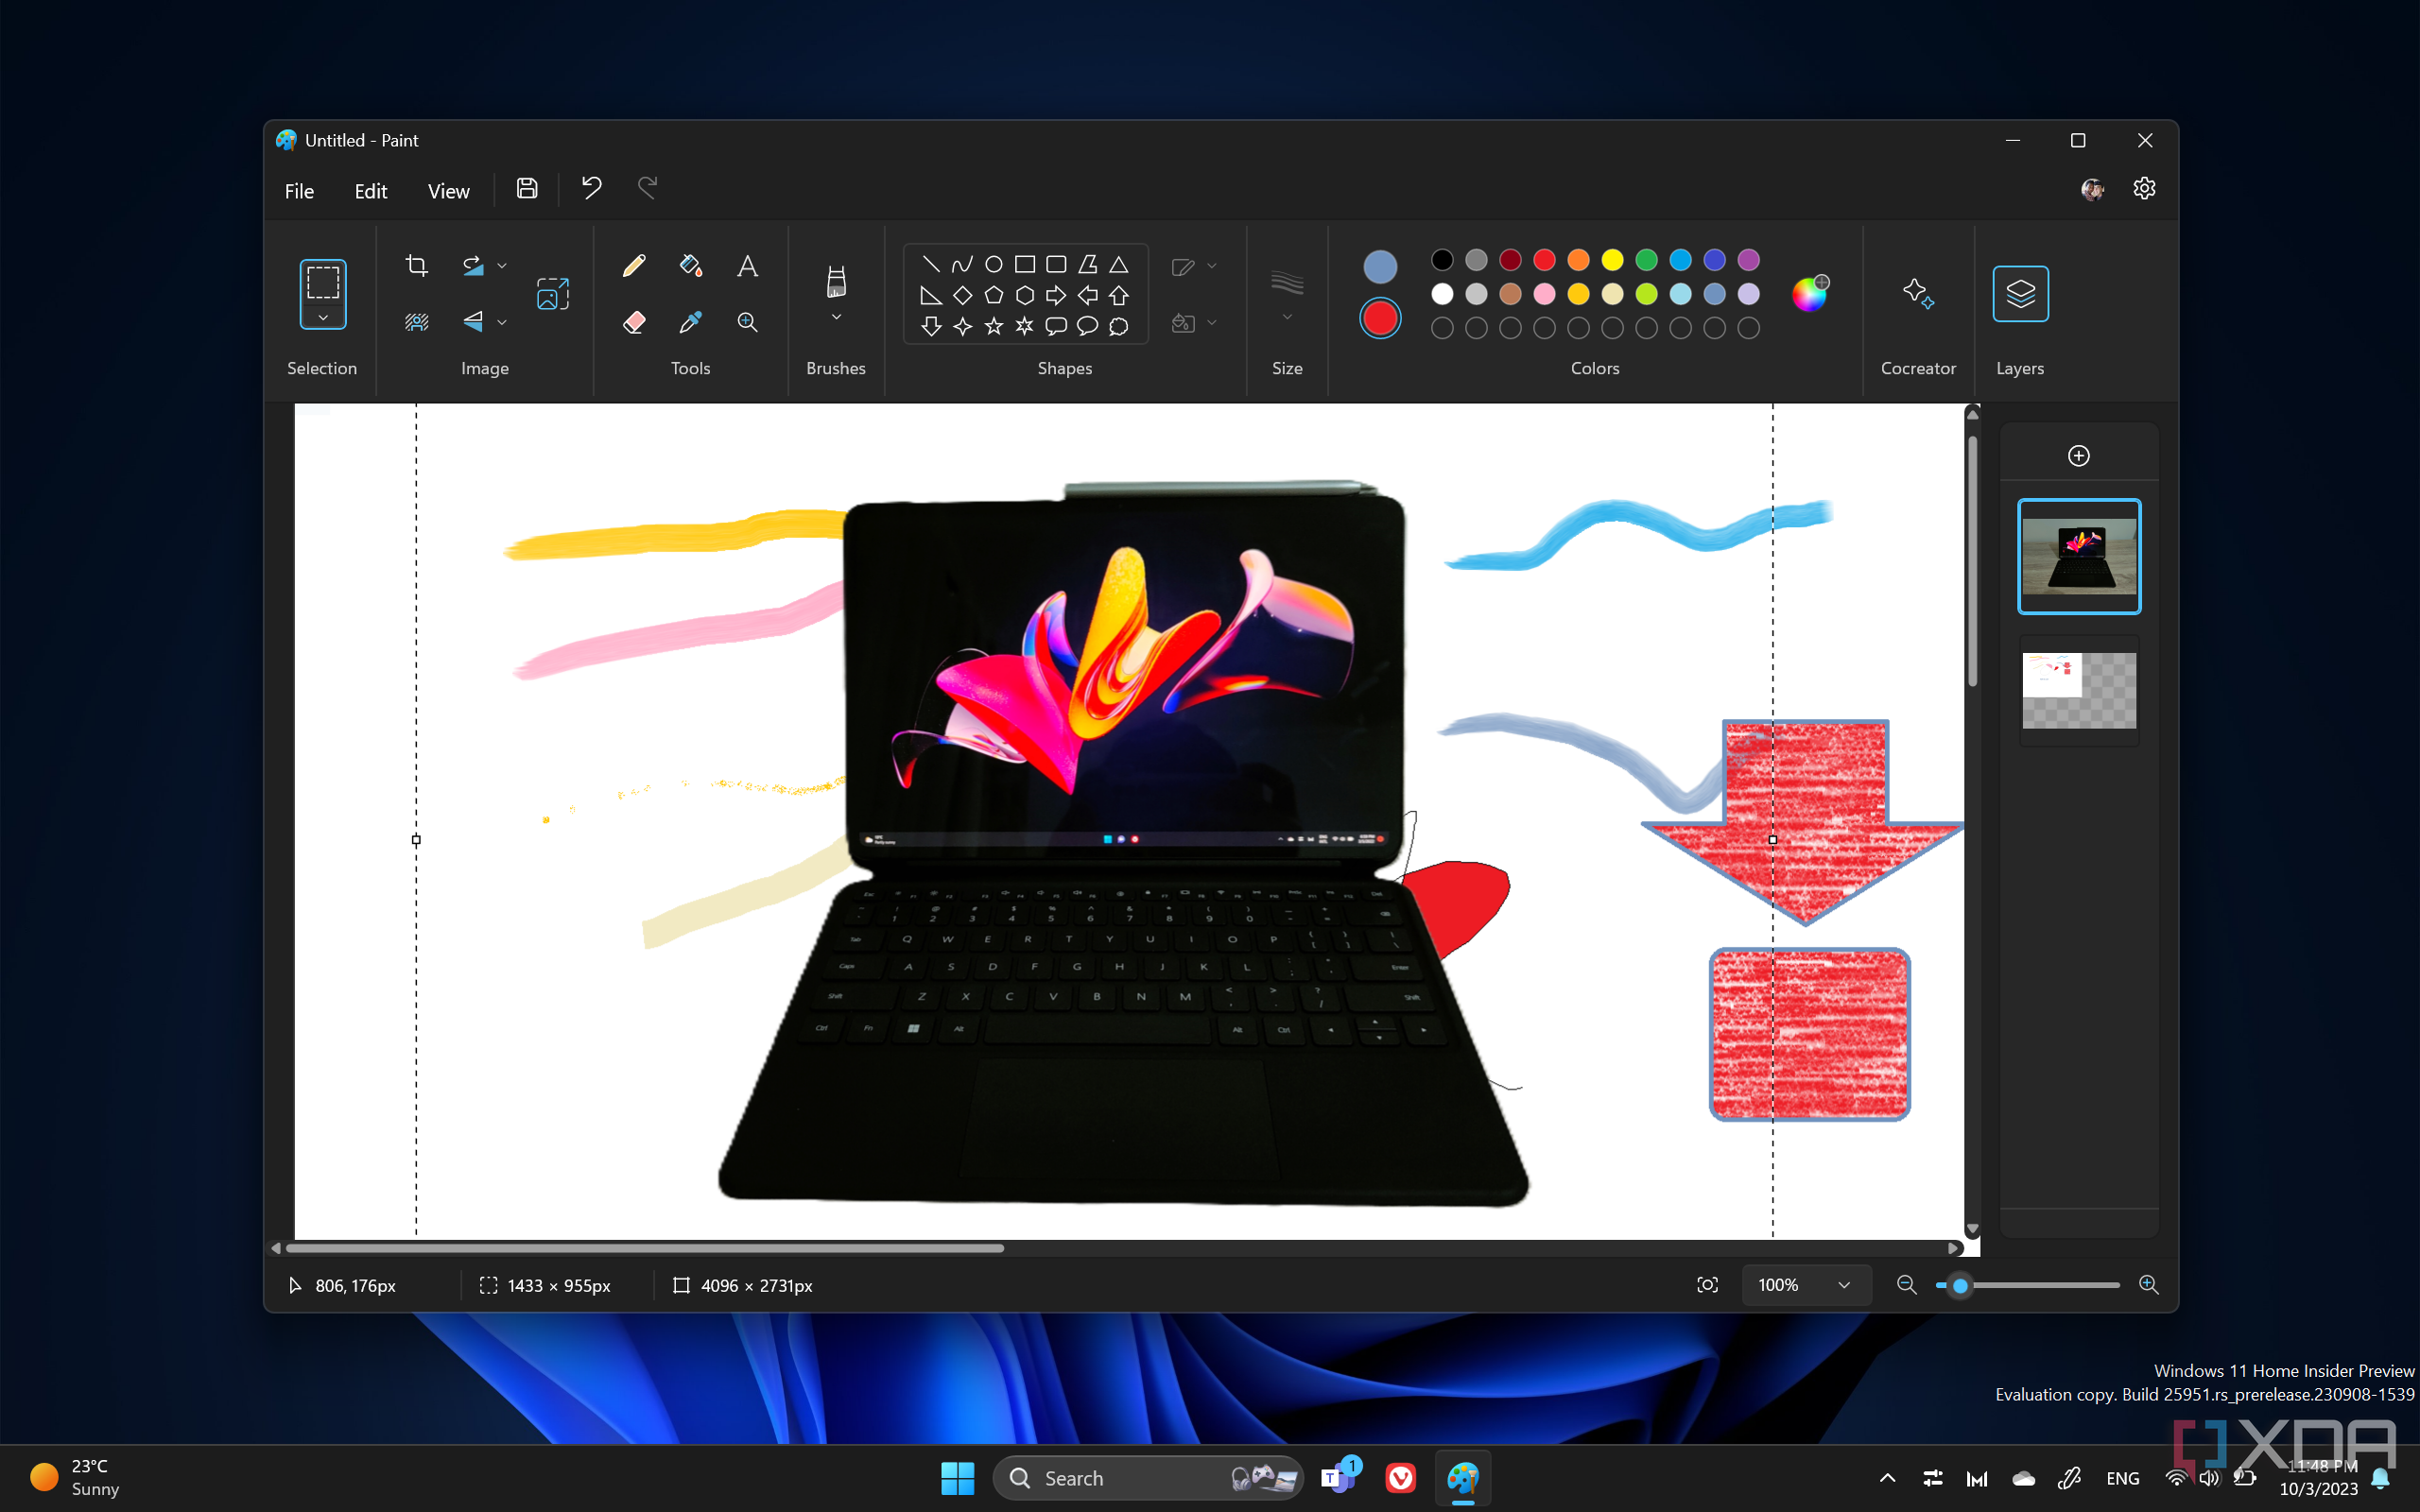 How to use the new Paint app in Windows 11